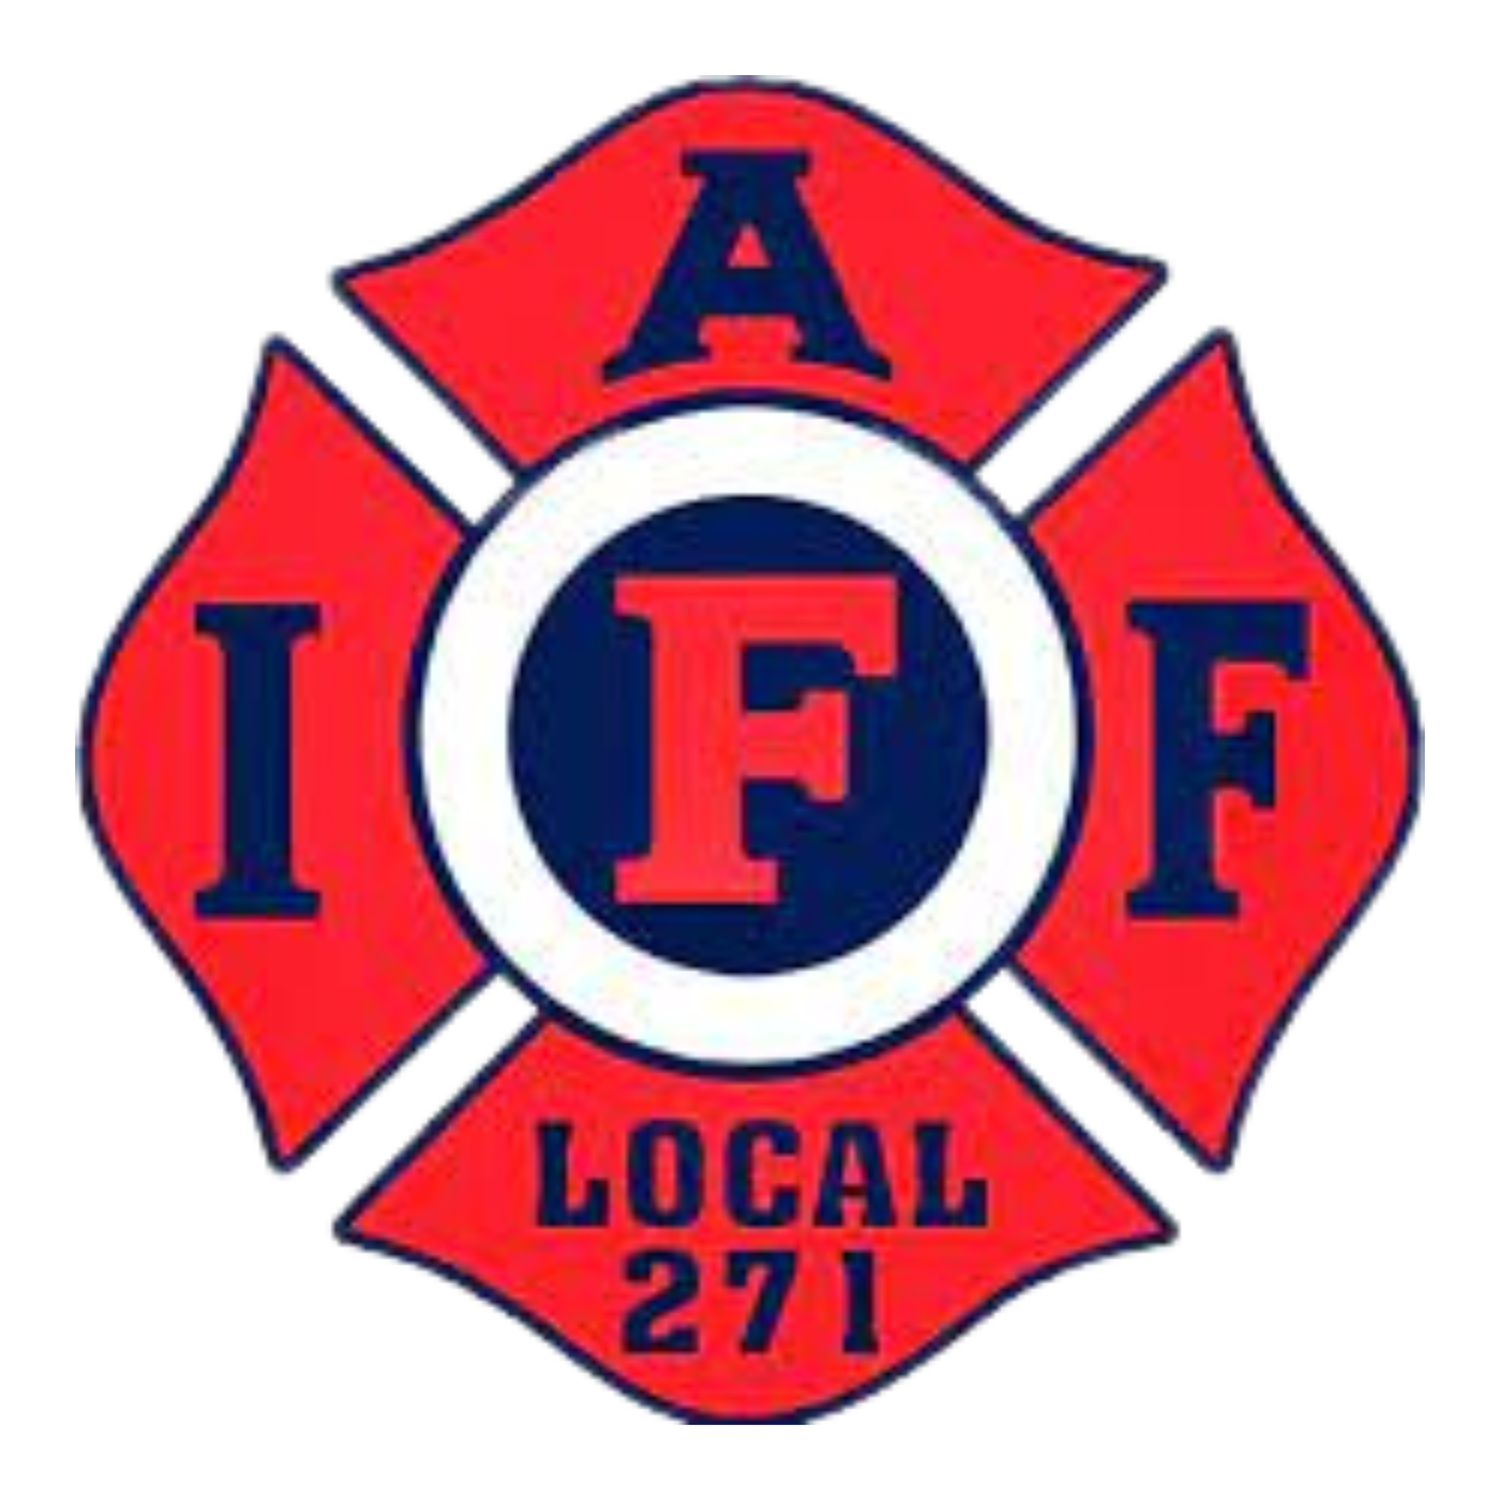 Missoula Firefighters Local 271